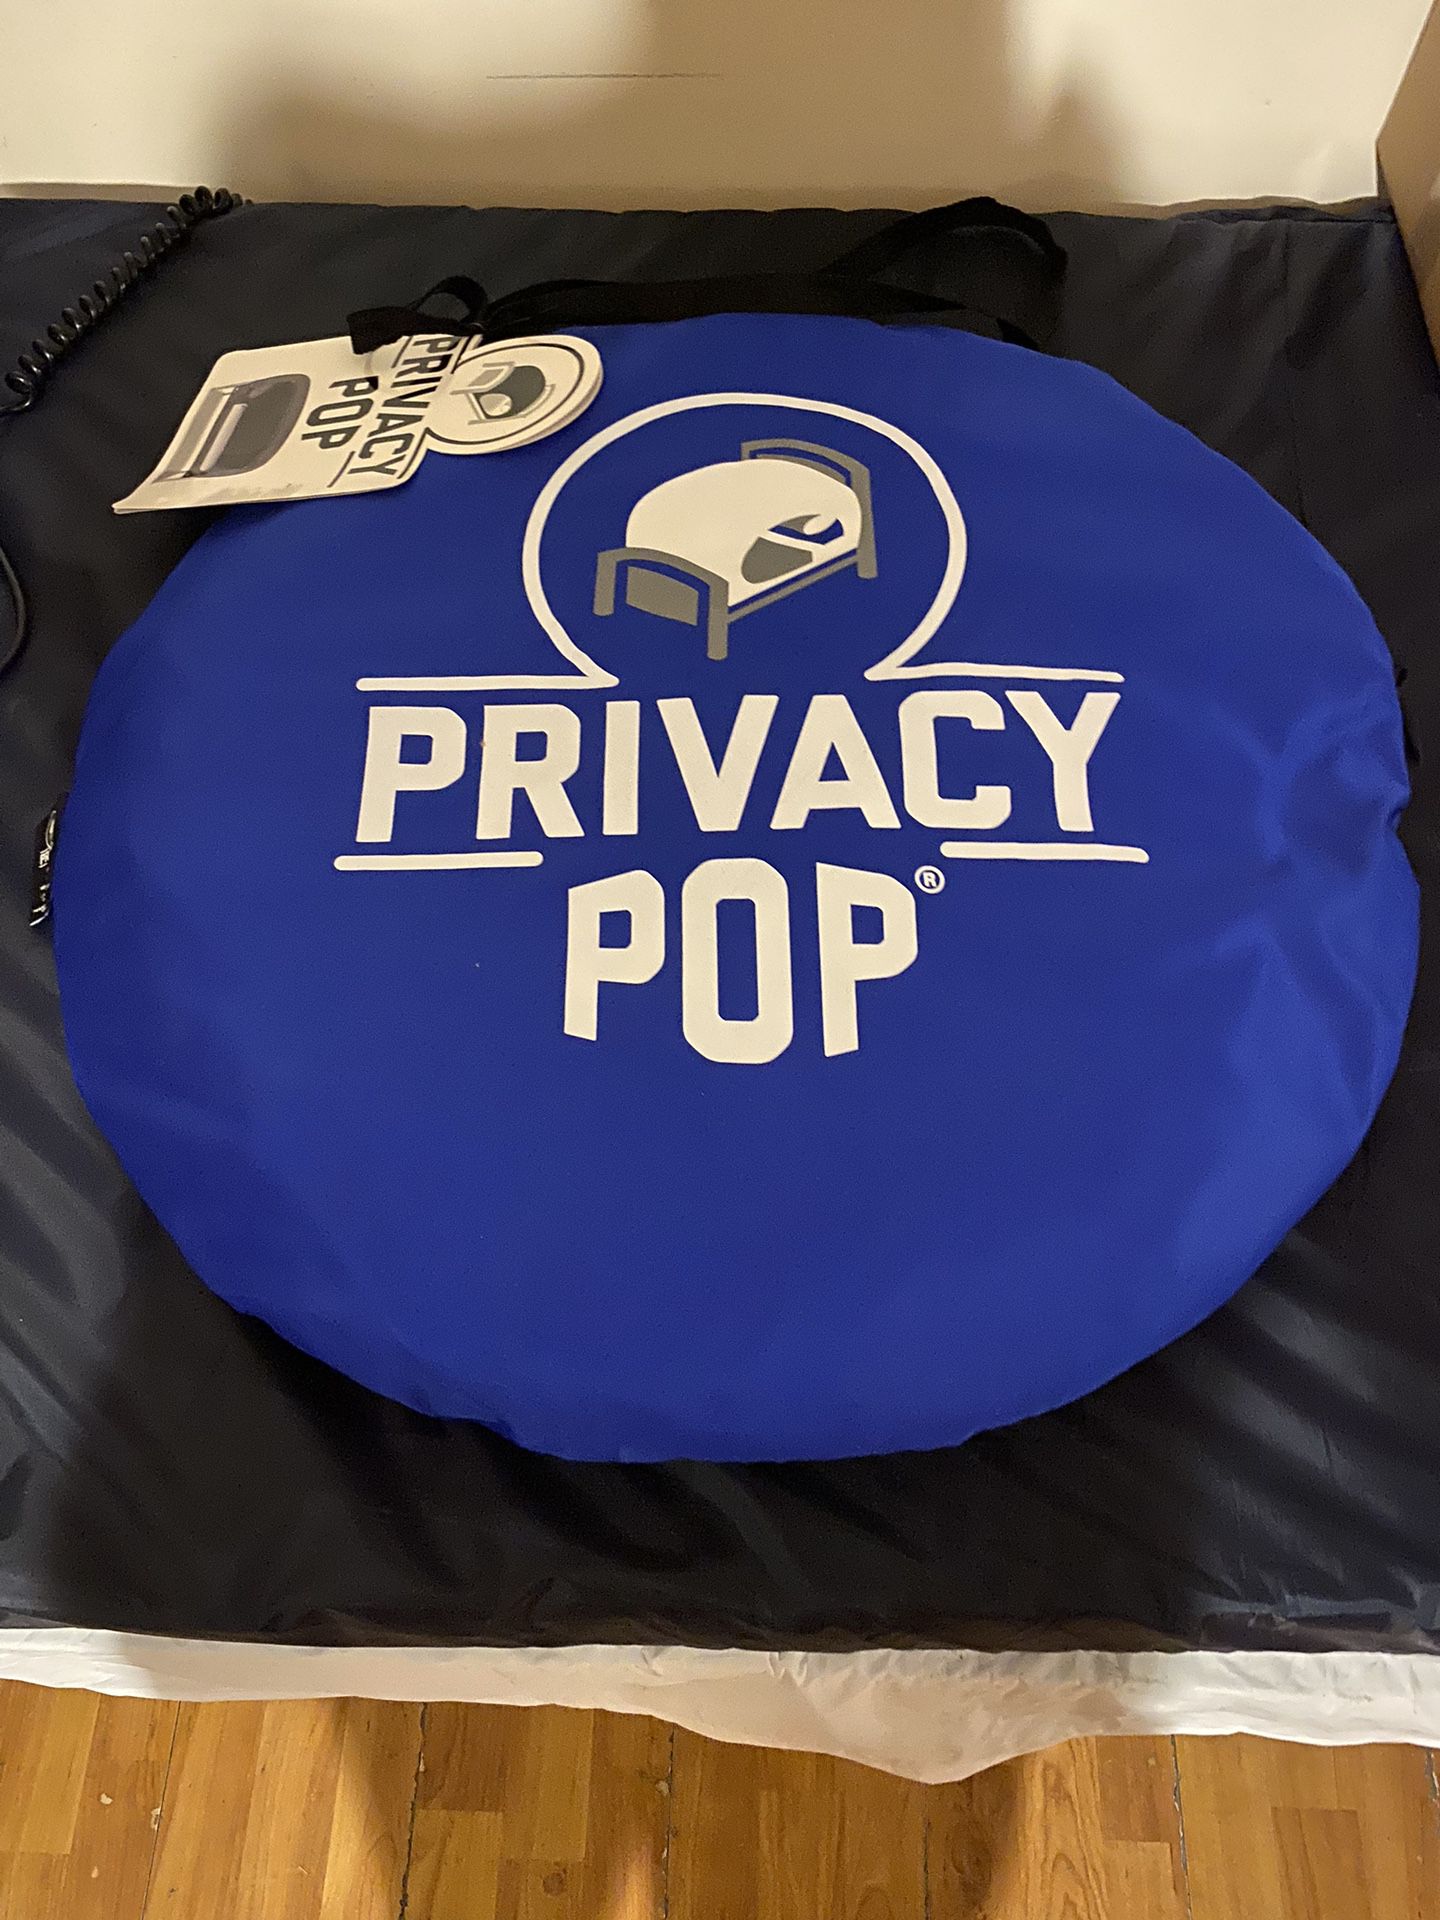 PRIVACY POP BED TENT